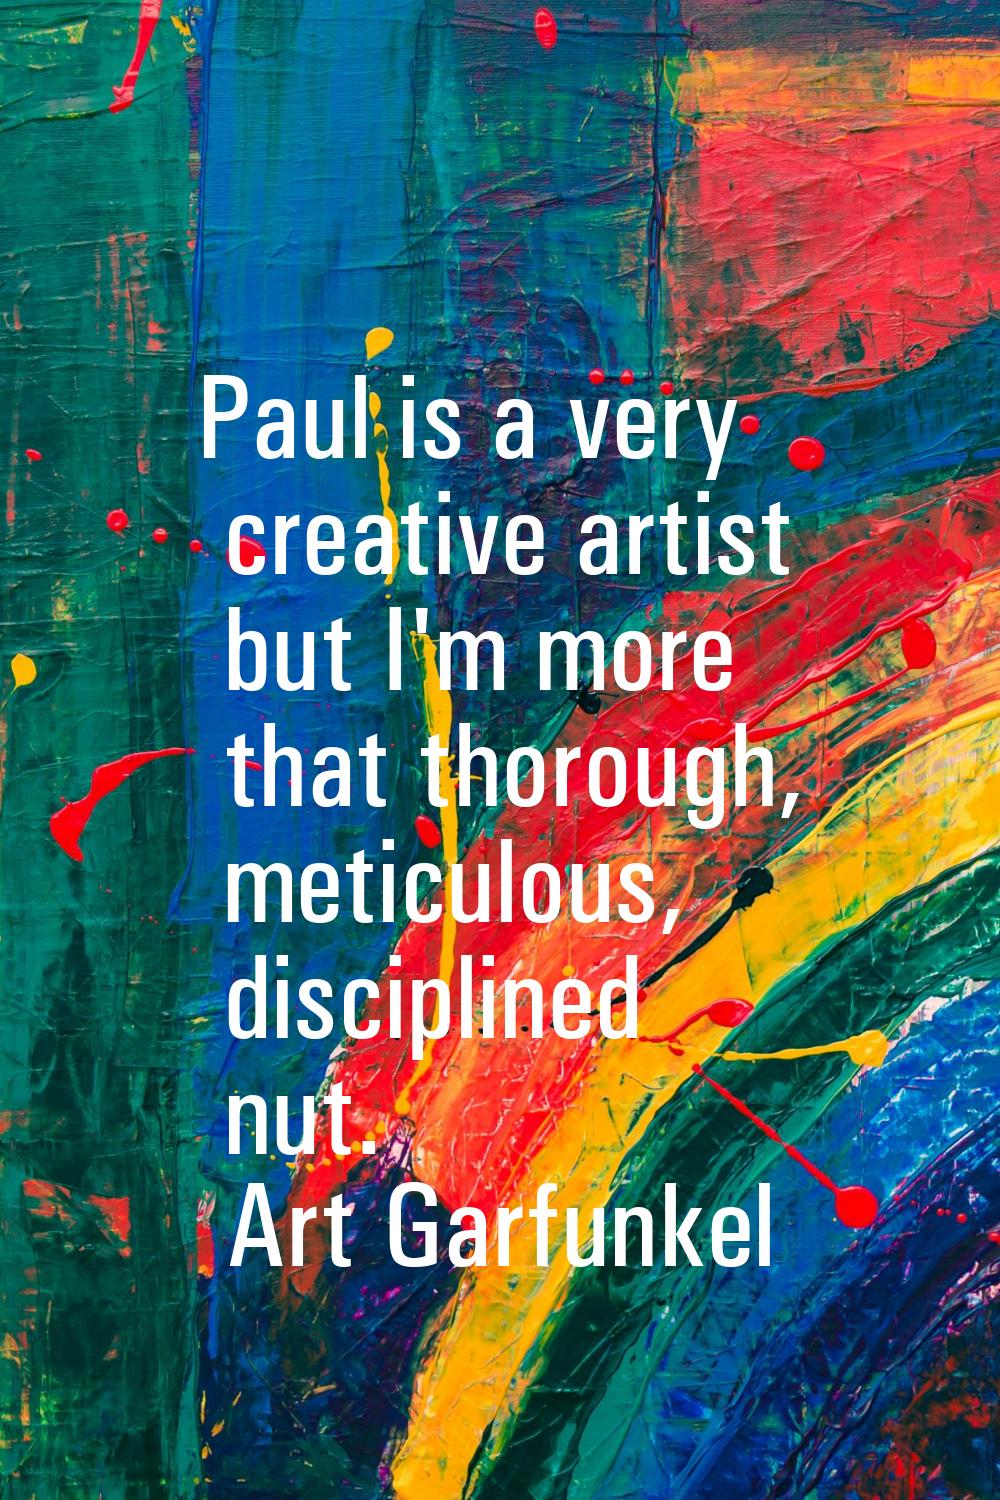 Paul is a very creative artist but I'm more that thorough, meticulous, disciplined nut.